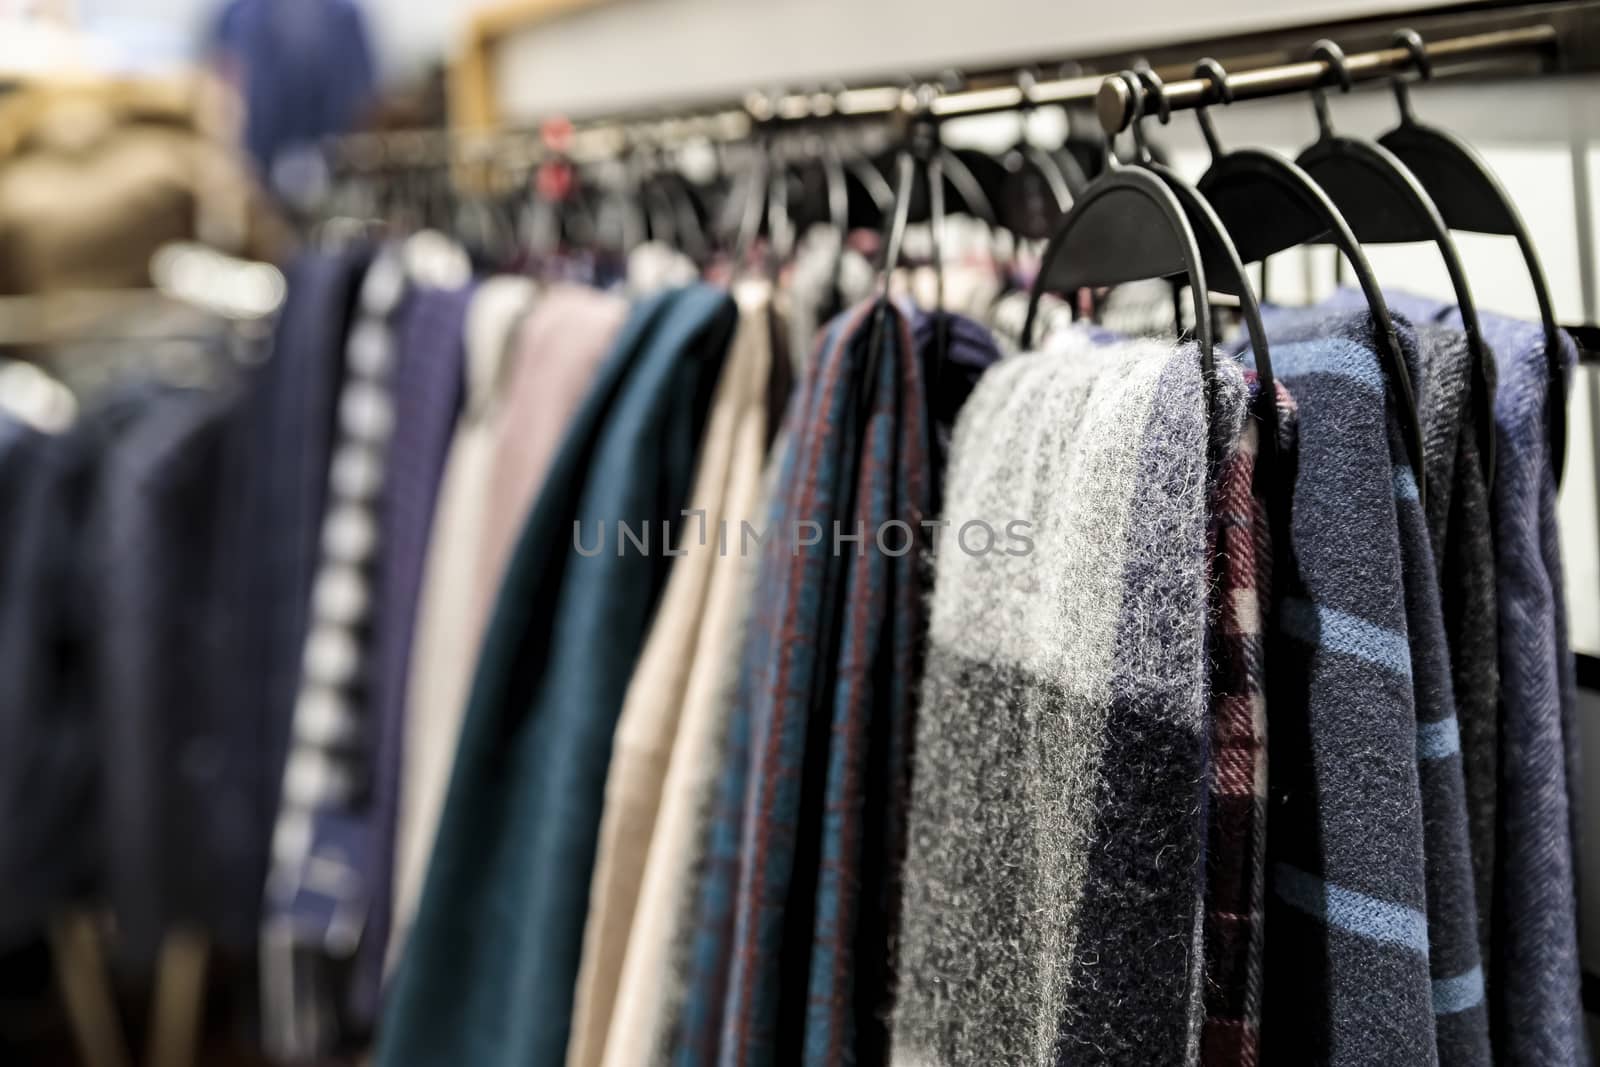 Soft winter scarves in different colors hang on hangers in the store. by bonilook